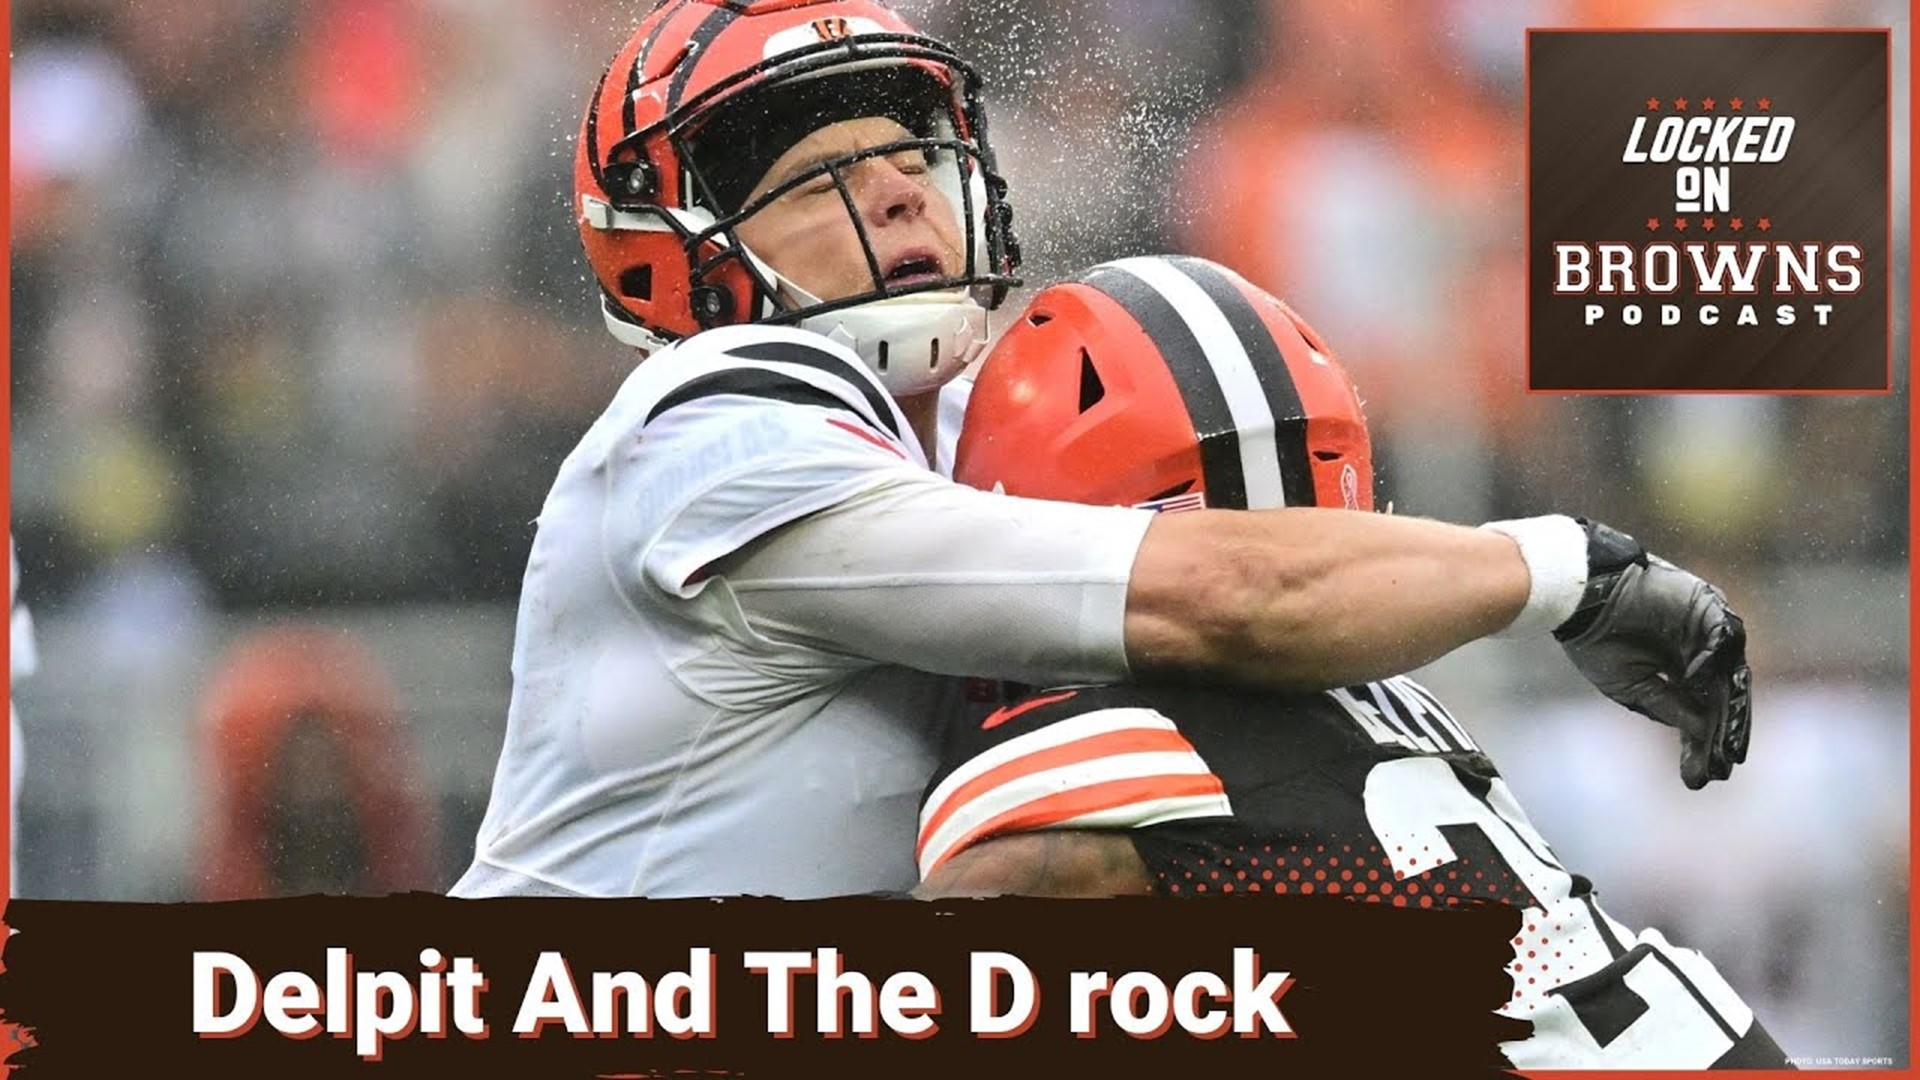 PFF's John Kosko joins in his weekly regular season episode to discuss the Cleveland Browns opening victory over the Cincinnati Bengals.